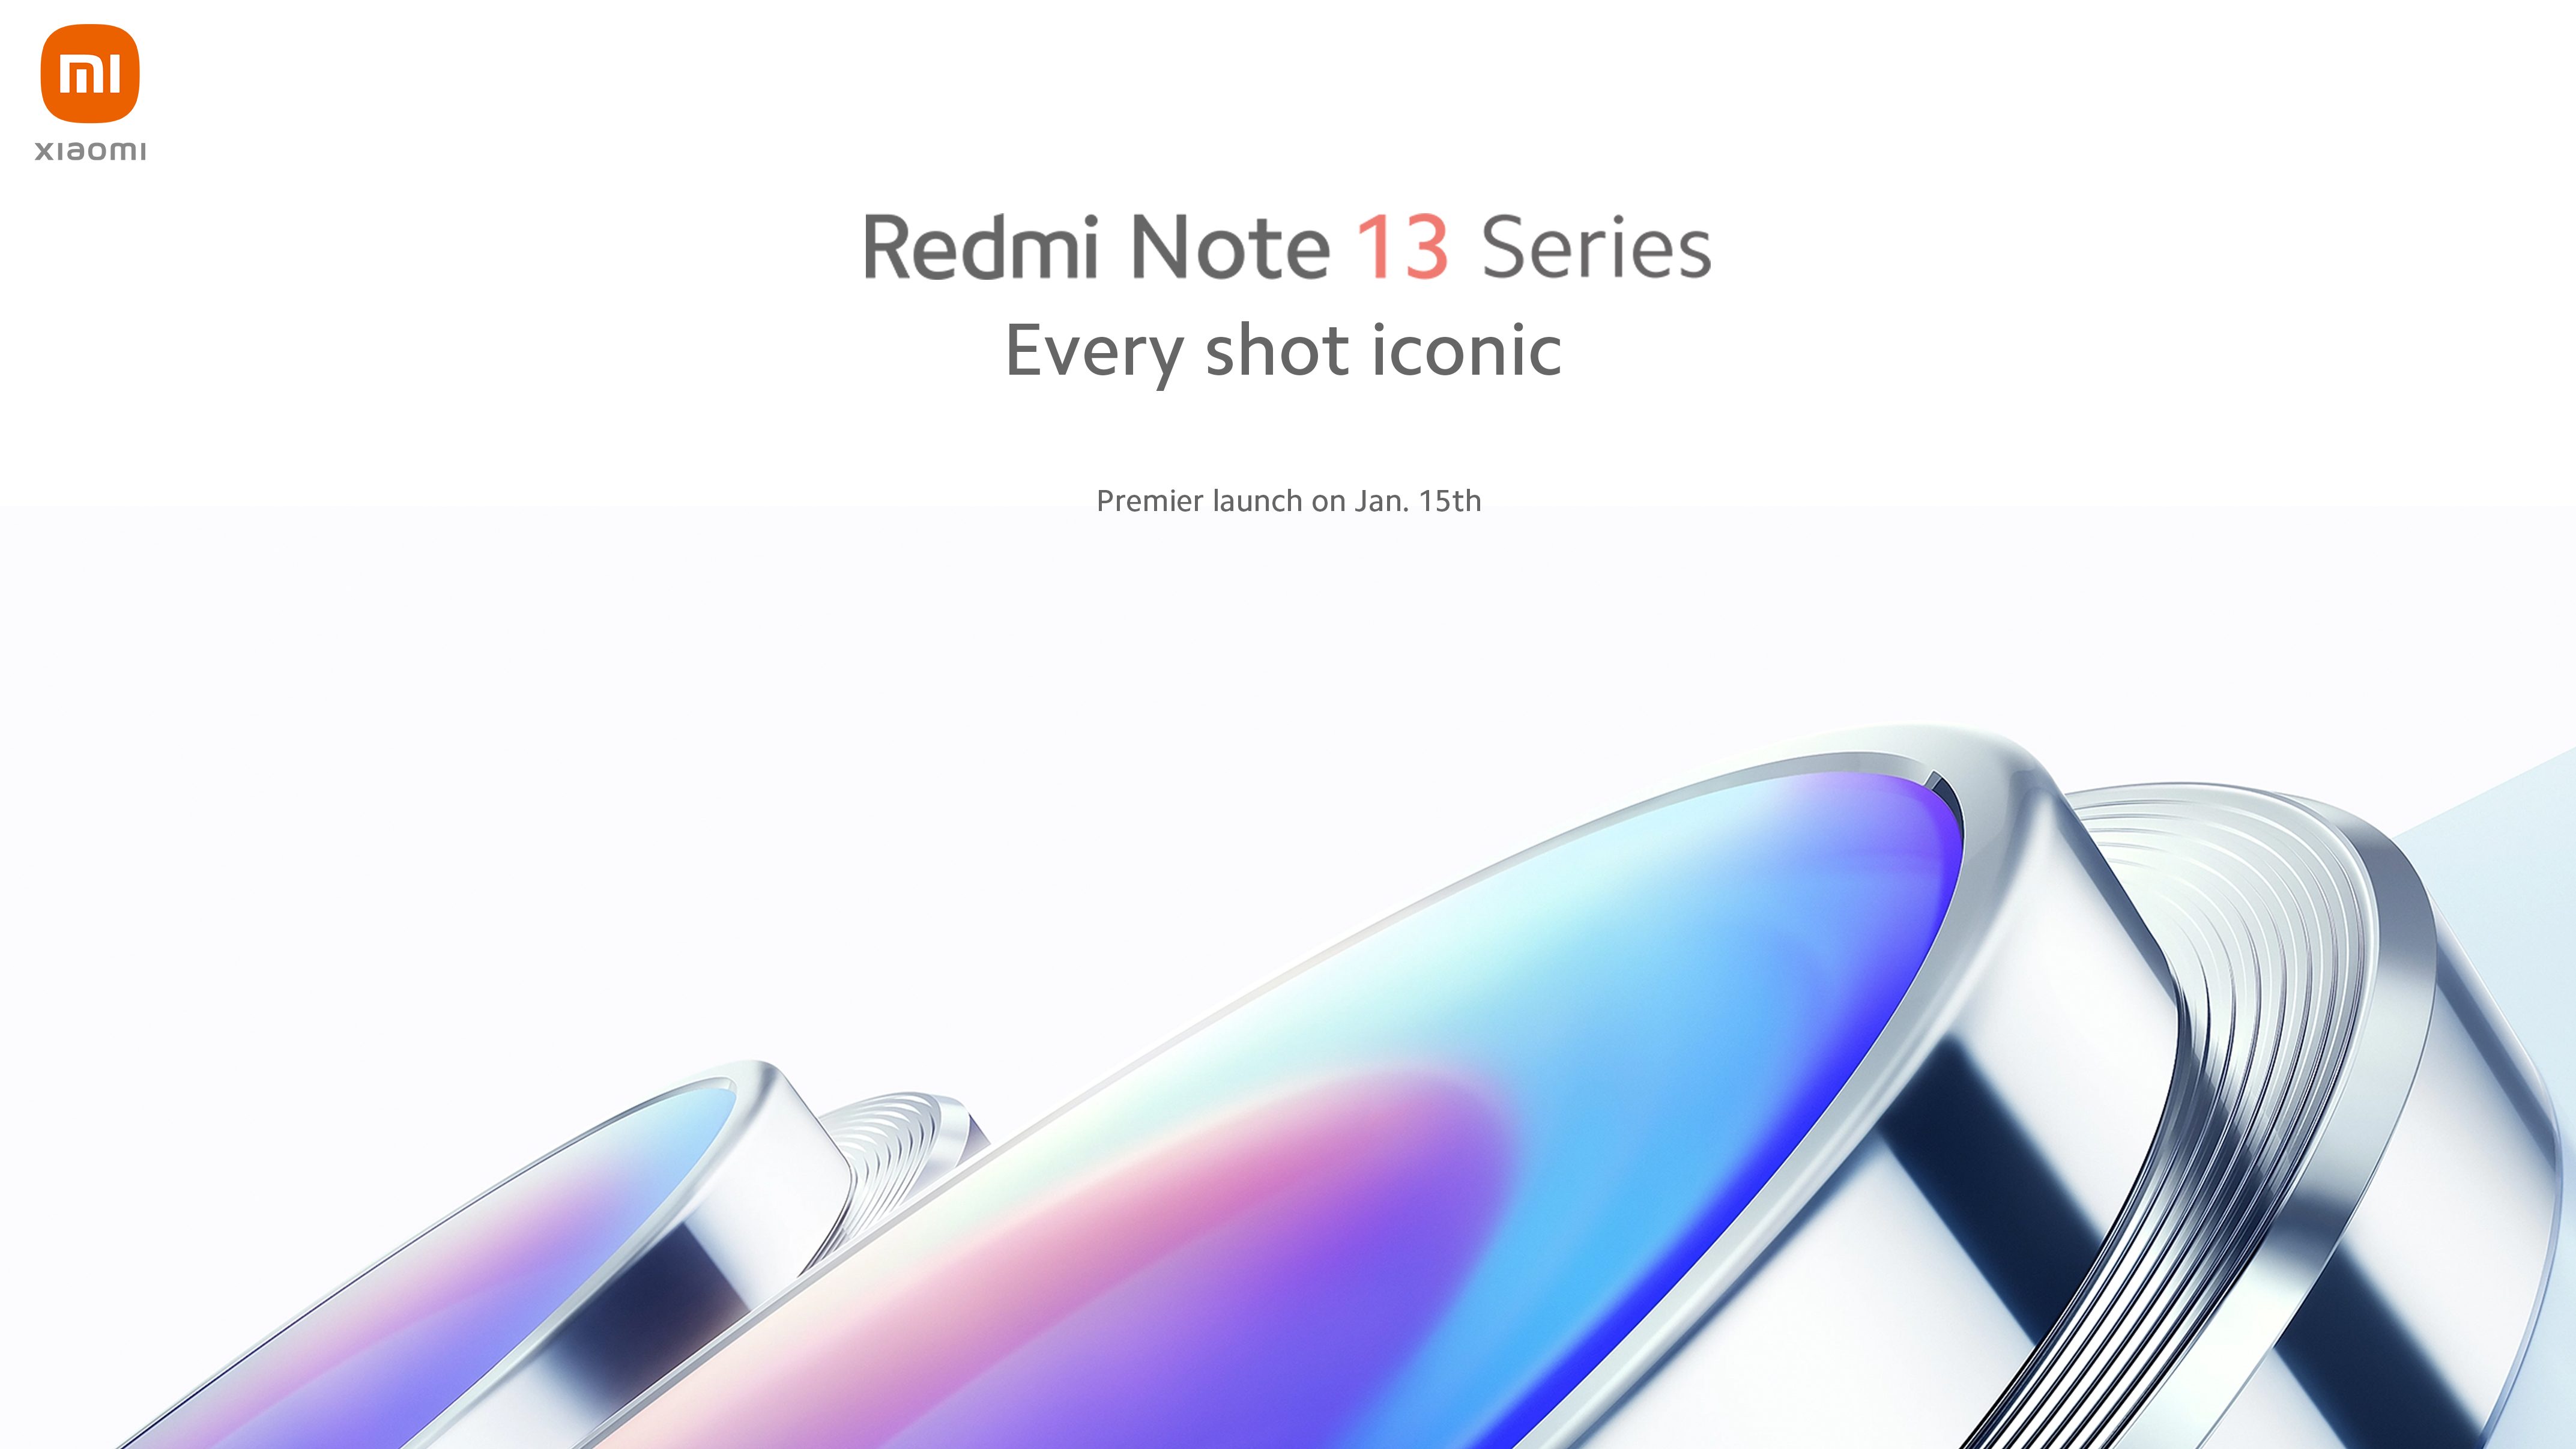 Xiaomi Redmi Note 13 5G series confirmed to launch with Snapdragon